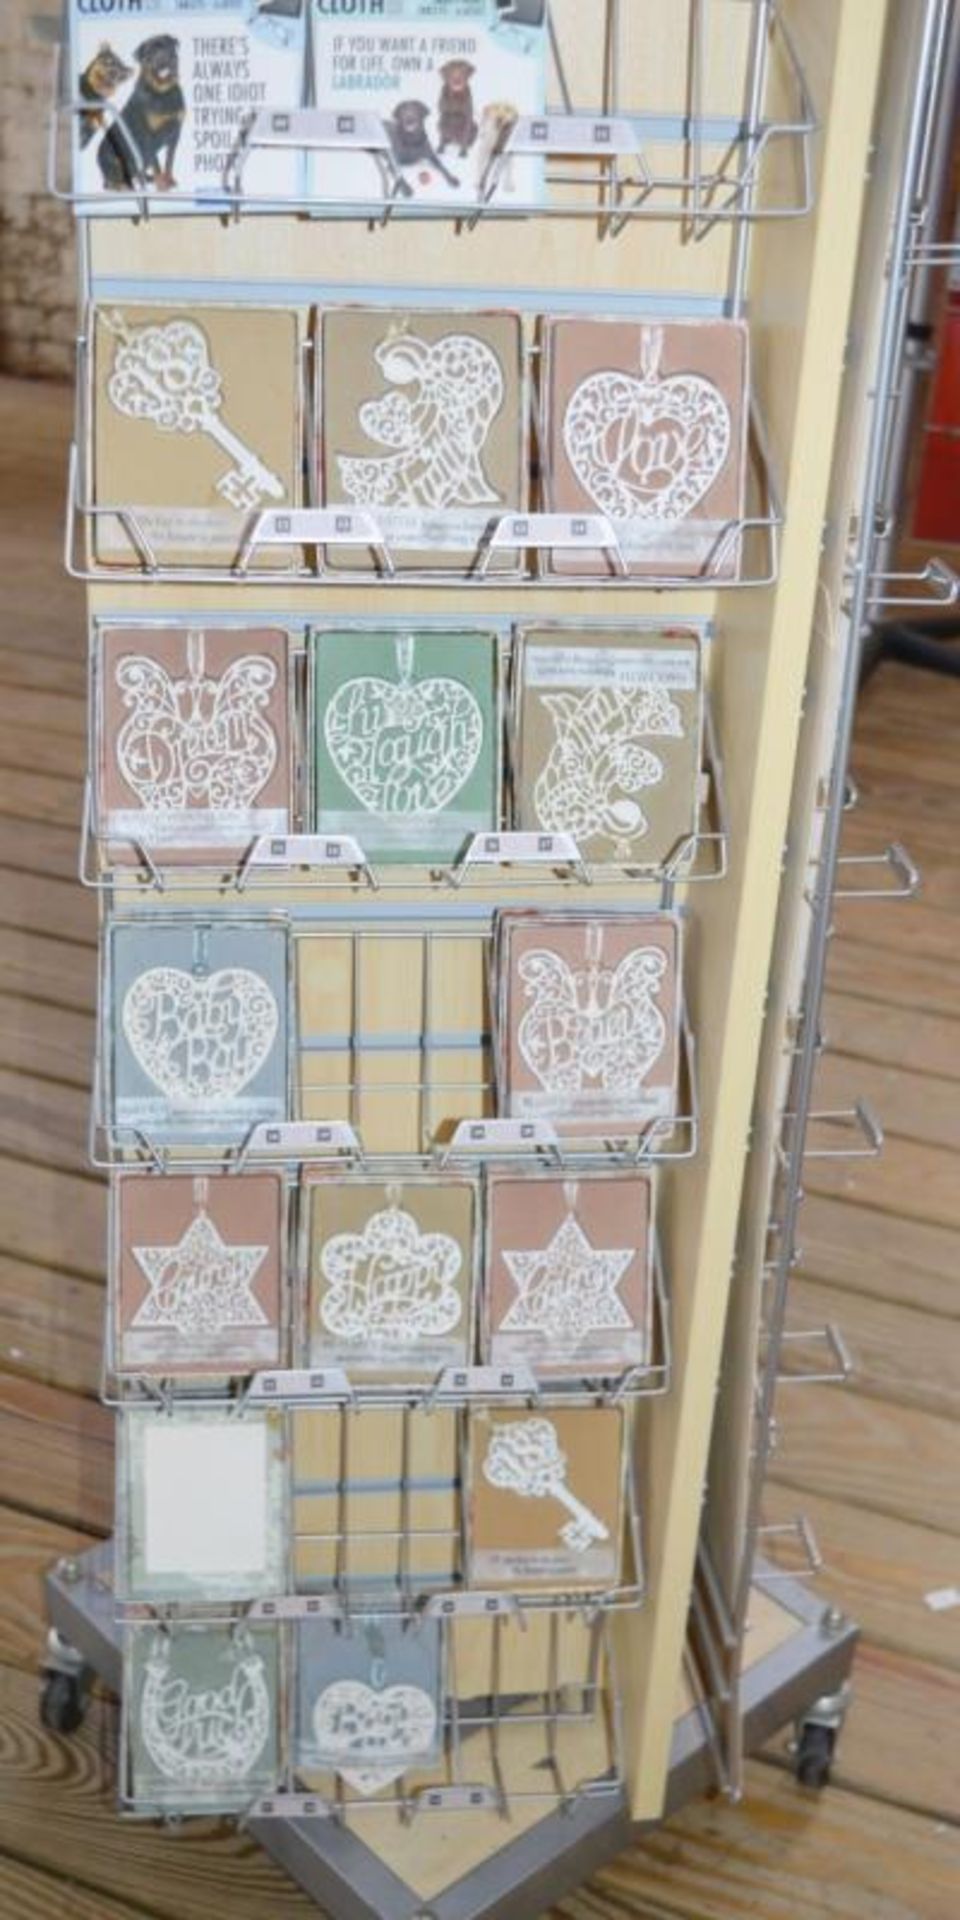 1 x Retail Carousel Display Stand With Approx 40 x Pieces of Giftware - Unused Stock - Ref BB1573 GF - Image 3 of 6